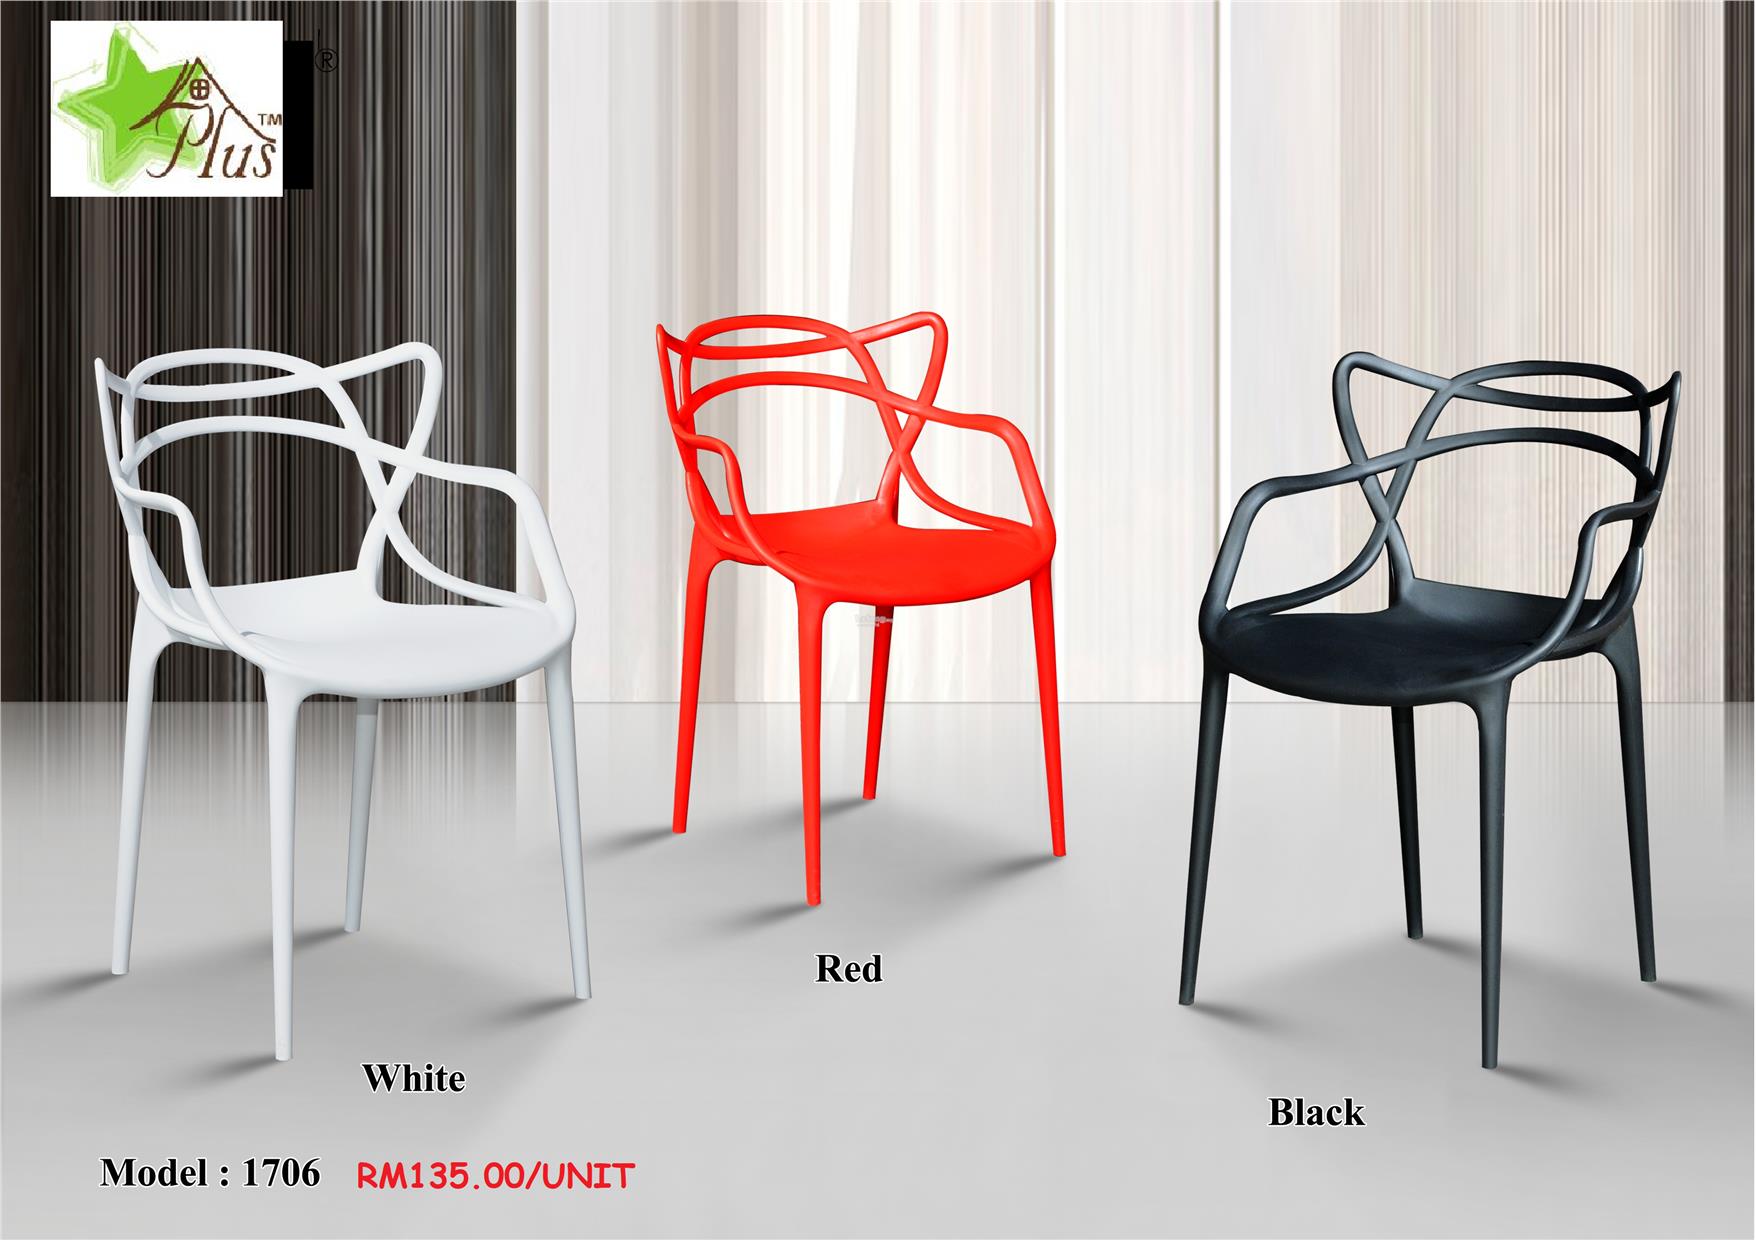 F & B CHAIR COLLECTIONS